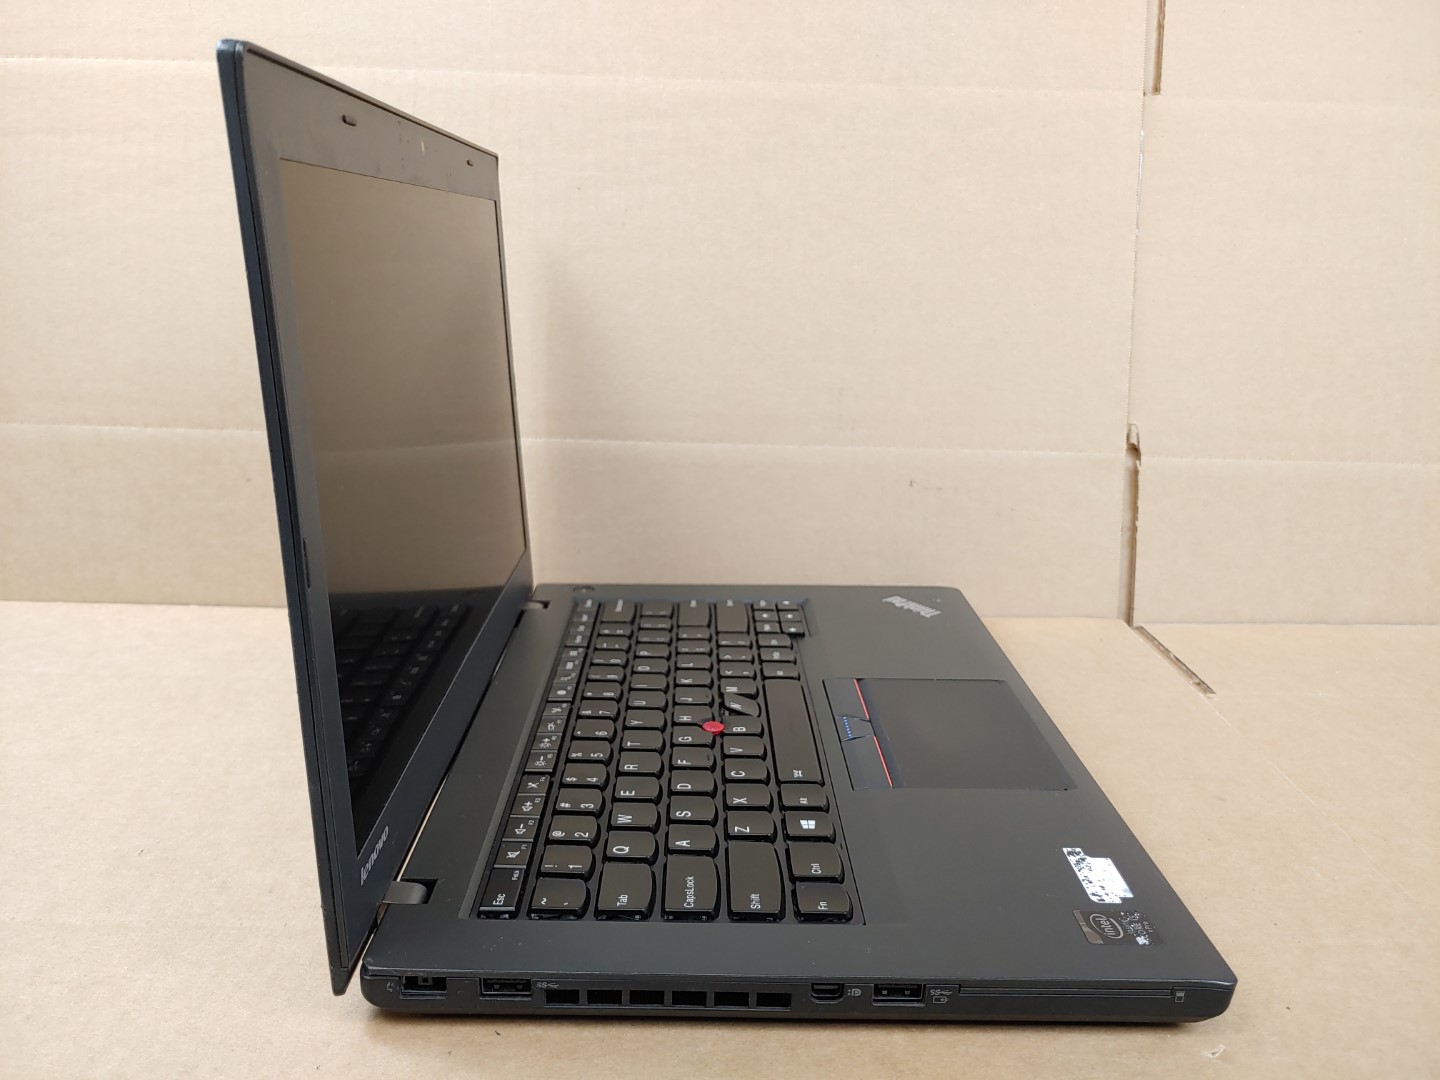 we have added actual images to this listing of the Lenovo ThinkPad you would receive.Item Specifics: MPN : ThinkPad T450 UPC : N/AType : LaptopBrand : LenovoProduct Line : ThinkPadModel : ThinkPad T450 Operating System : N/AScreen Size : 14-inchProcessor Type : Intel Core i5-5300U 5th GenProcessor Speed : 2.30GHzMemory : 8GBHard Drive Capacity : 256GB SSD - 1